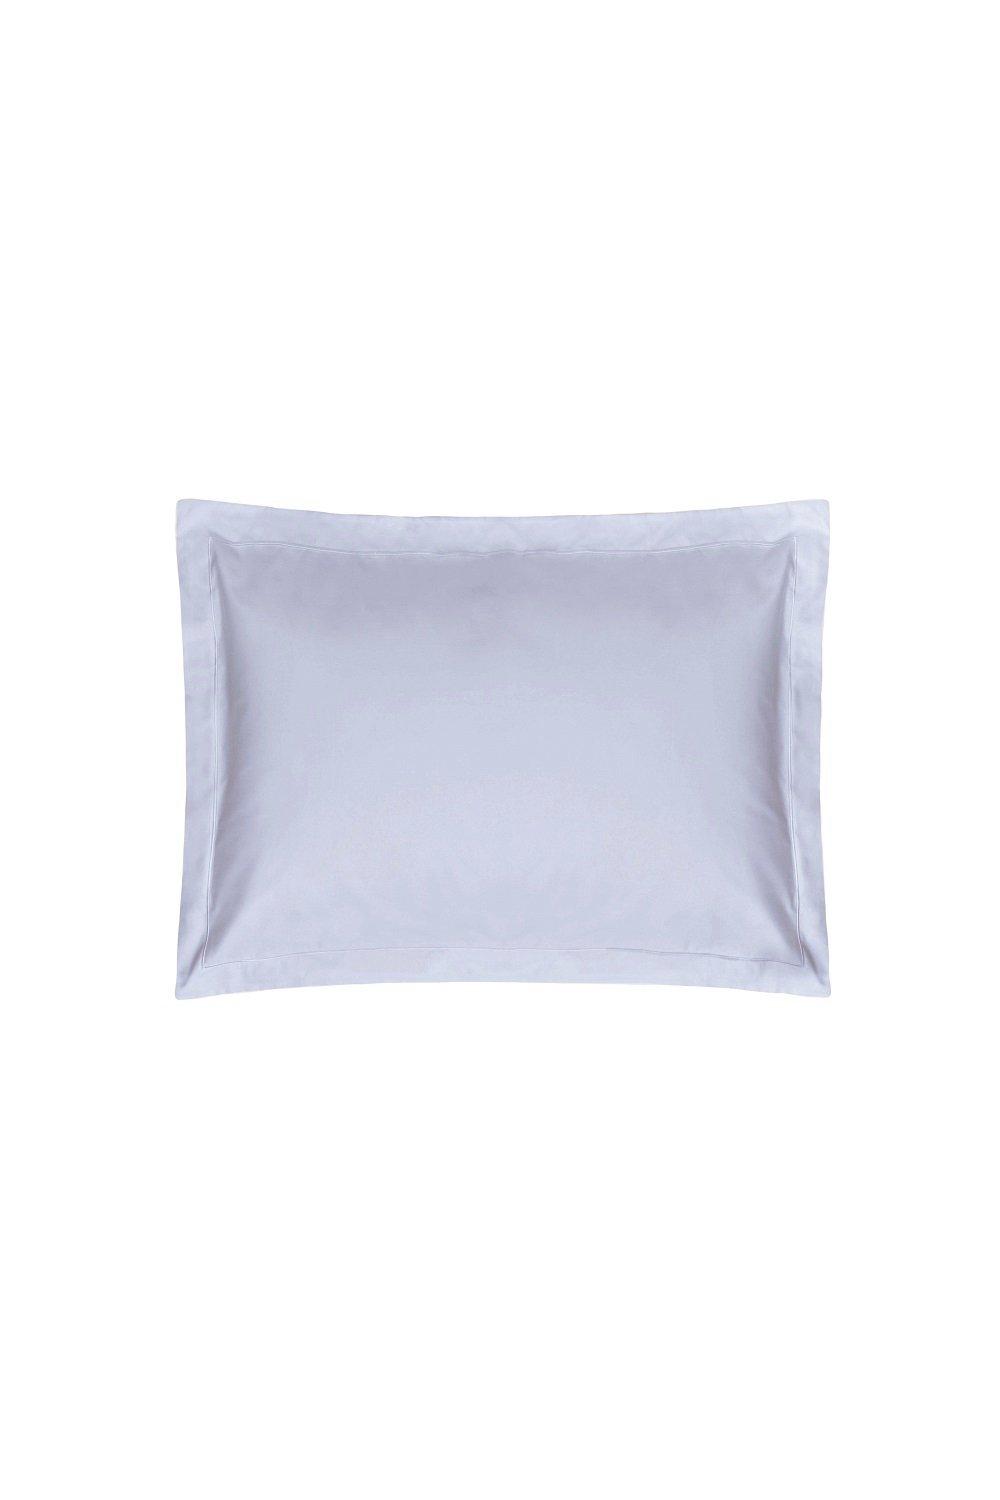 Belledorm Easy Care 200 Thread Count Cotton Polyester Percale Oxford Pillowcase|pale lilac